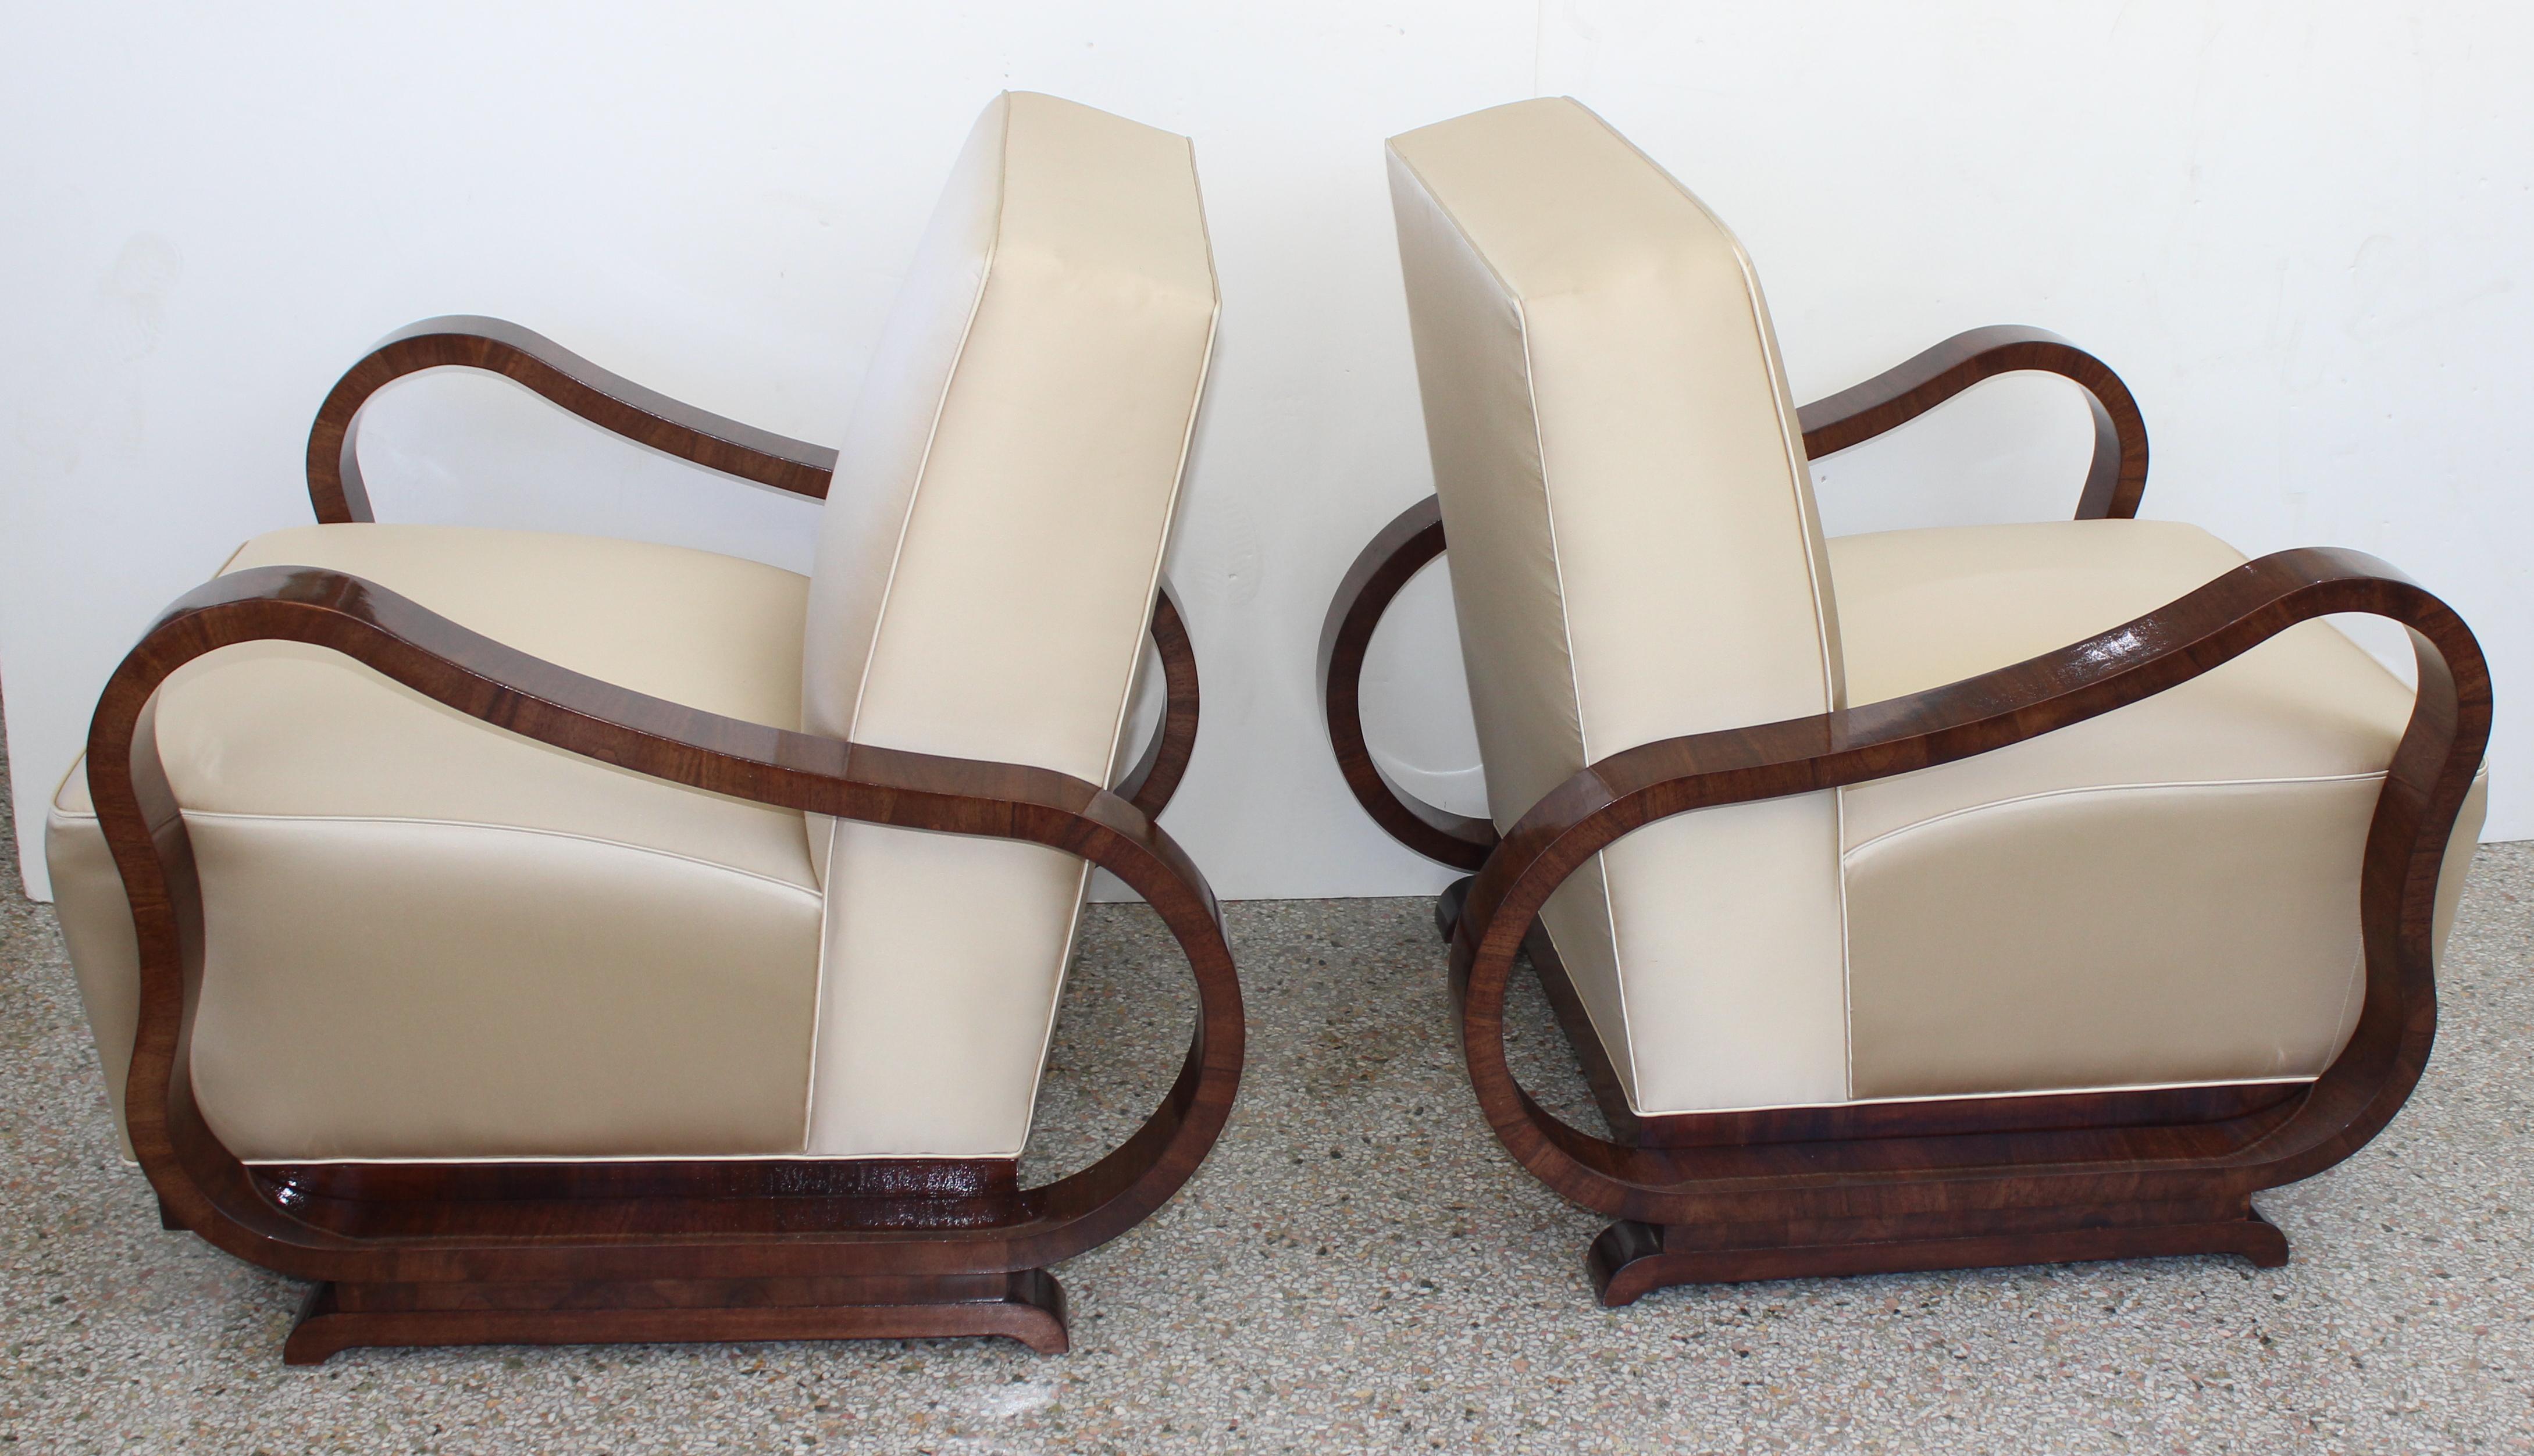 This stylish set of Art Deco style lounge chairs are attributed to the Czech designer Jindřich Halabala and they date to the 1930s. The frames are a deep walnut coloration, and the upholstery is a soft gold satin.

Note: We're not certain if the